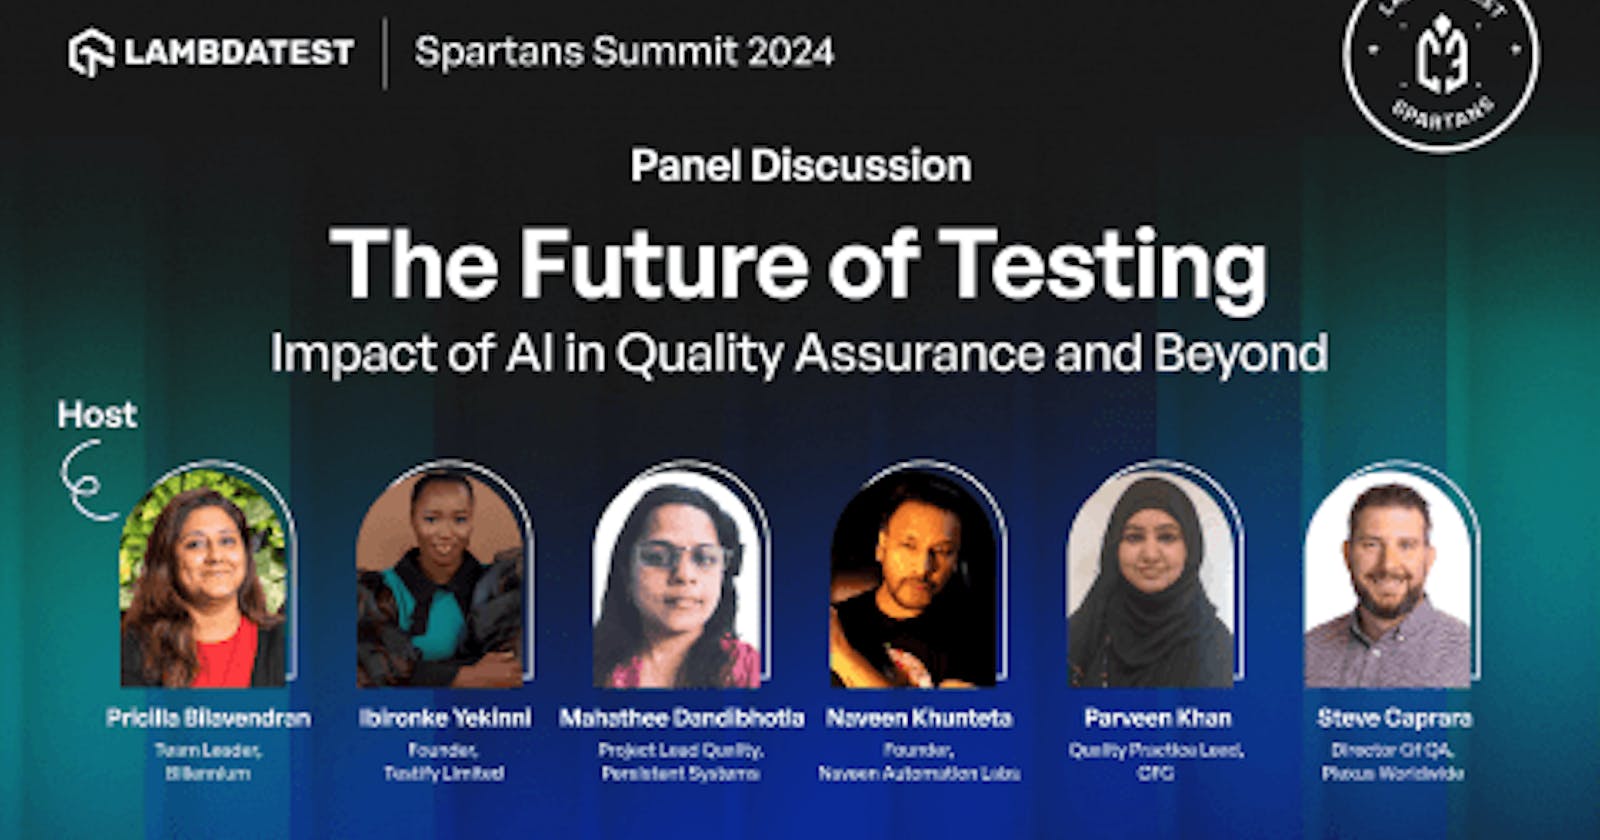 Panel Discussion: The Future of Testing- Impact of AI in Quality Assurance and Beyond [Spartans Summit 2024]